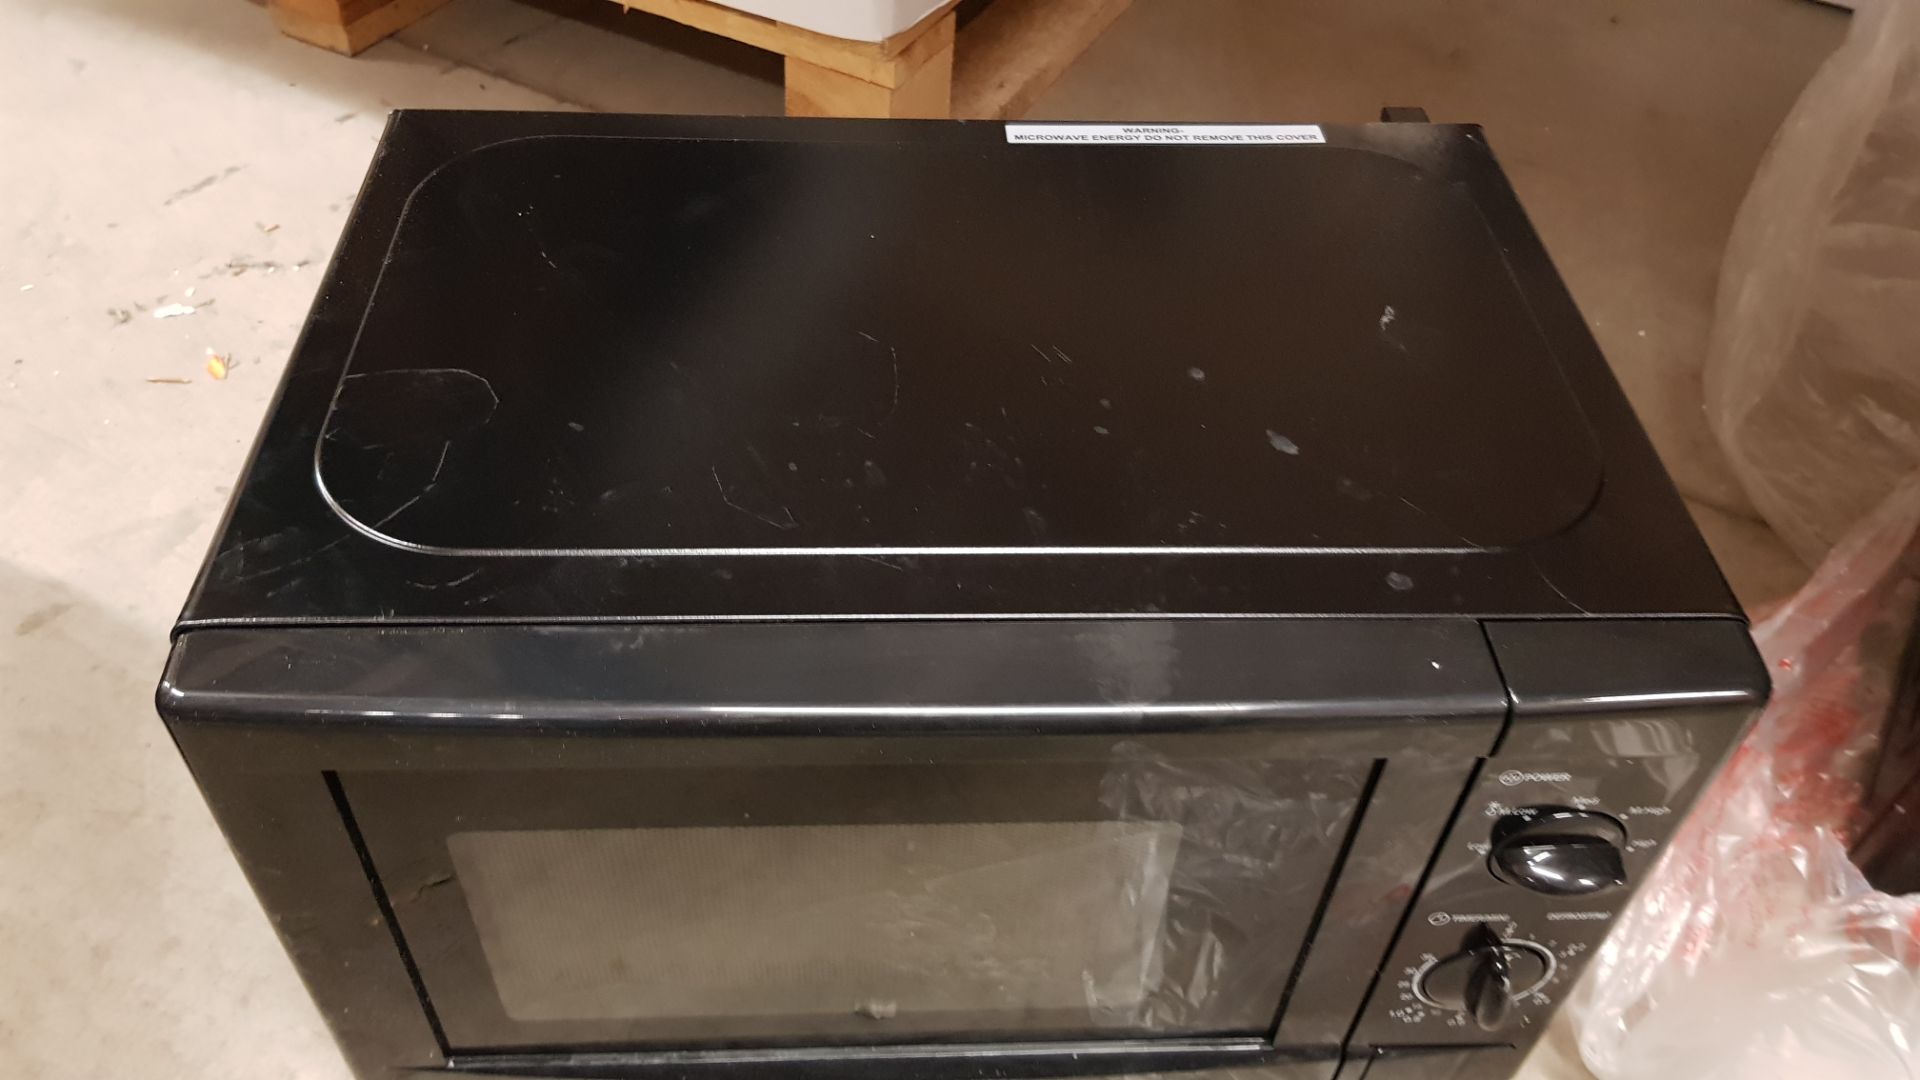 2x Microwave Oven Black 700W 17L (GMM001NB-18) RRP £60 Each. (Spares Or Repairs). - Image 5 of 7